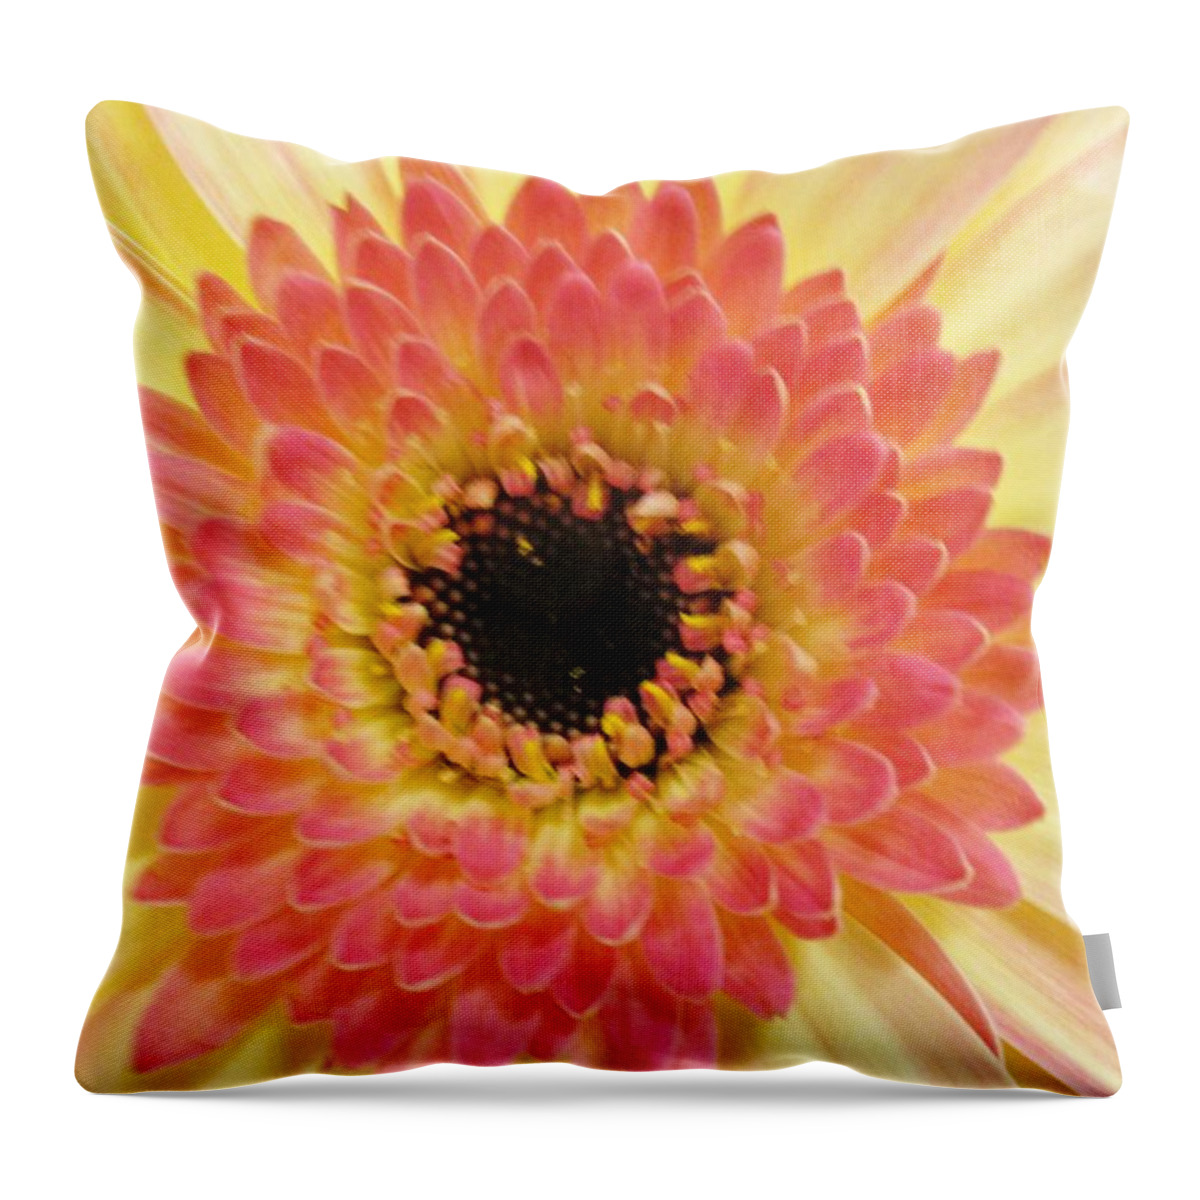 Pink Throw Pillow featuring the photograph Illusory by Rosita Larsson